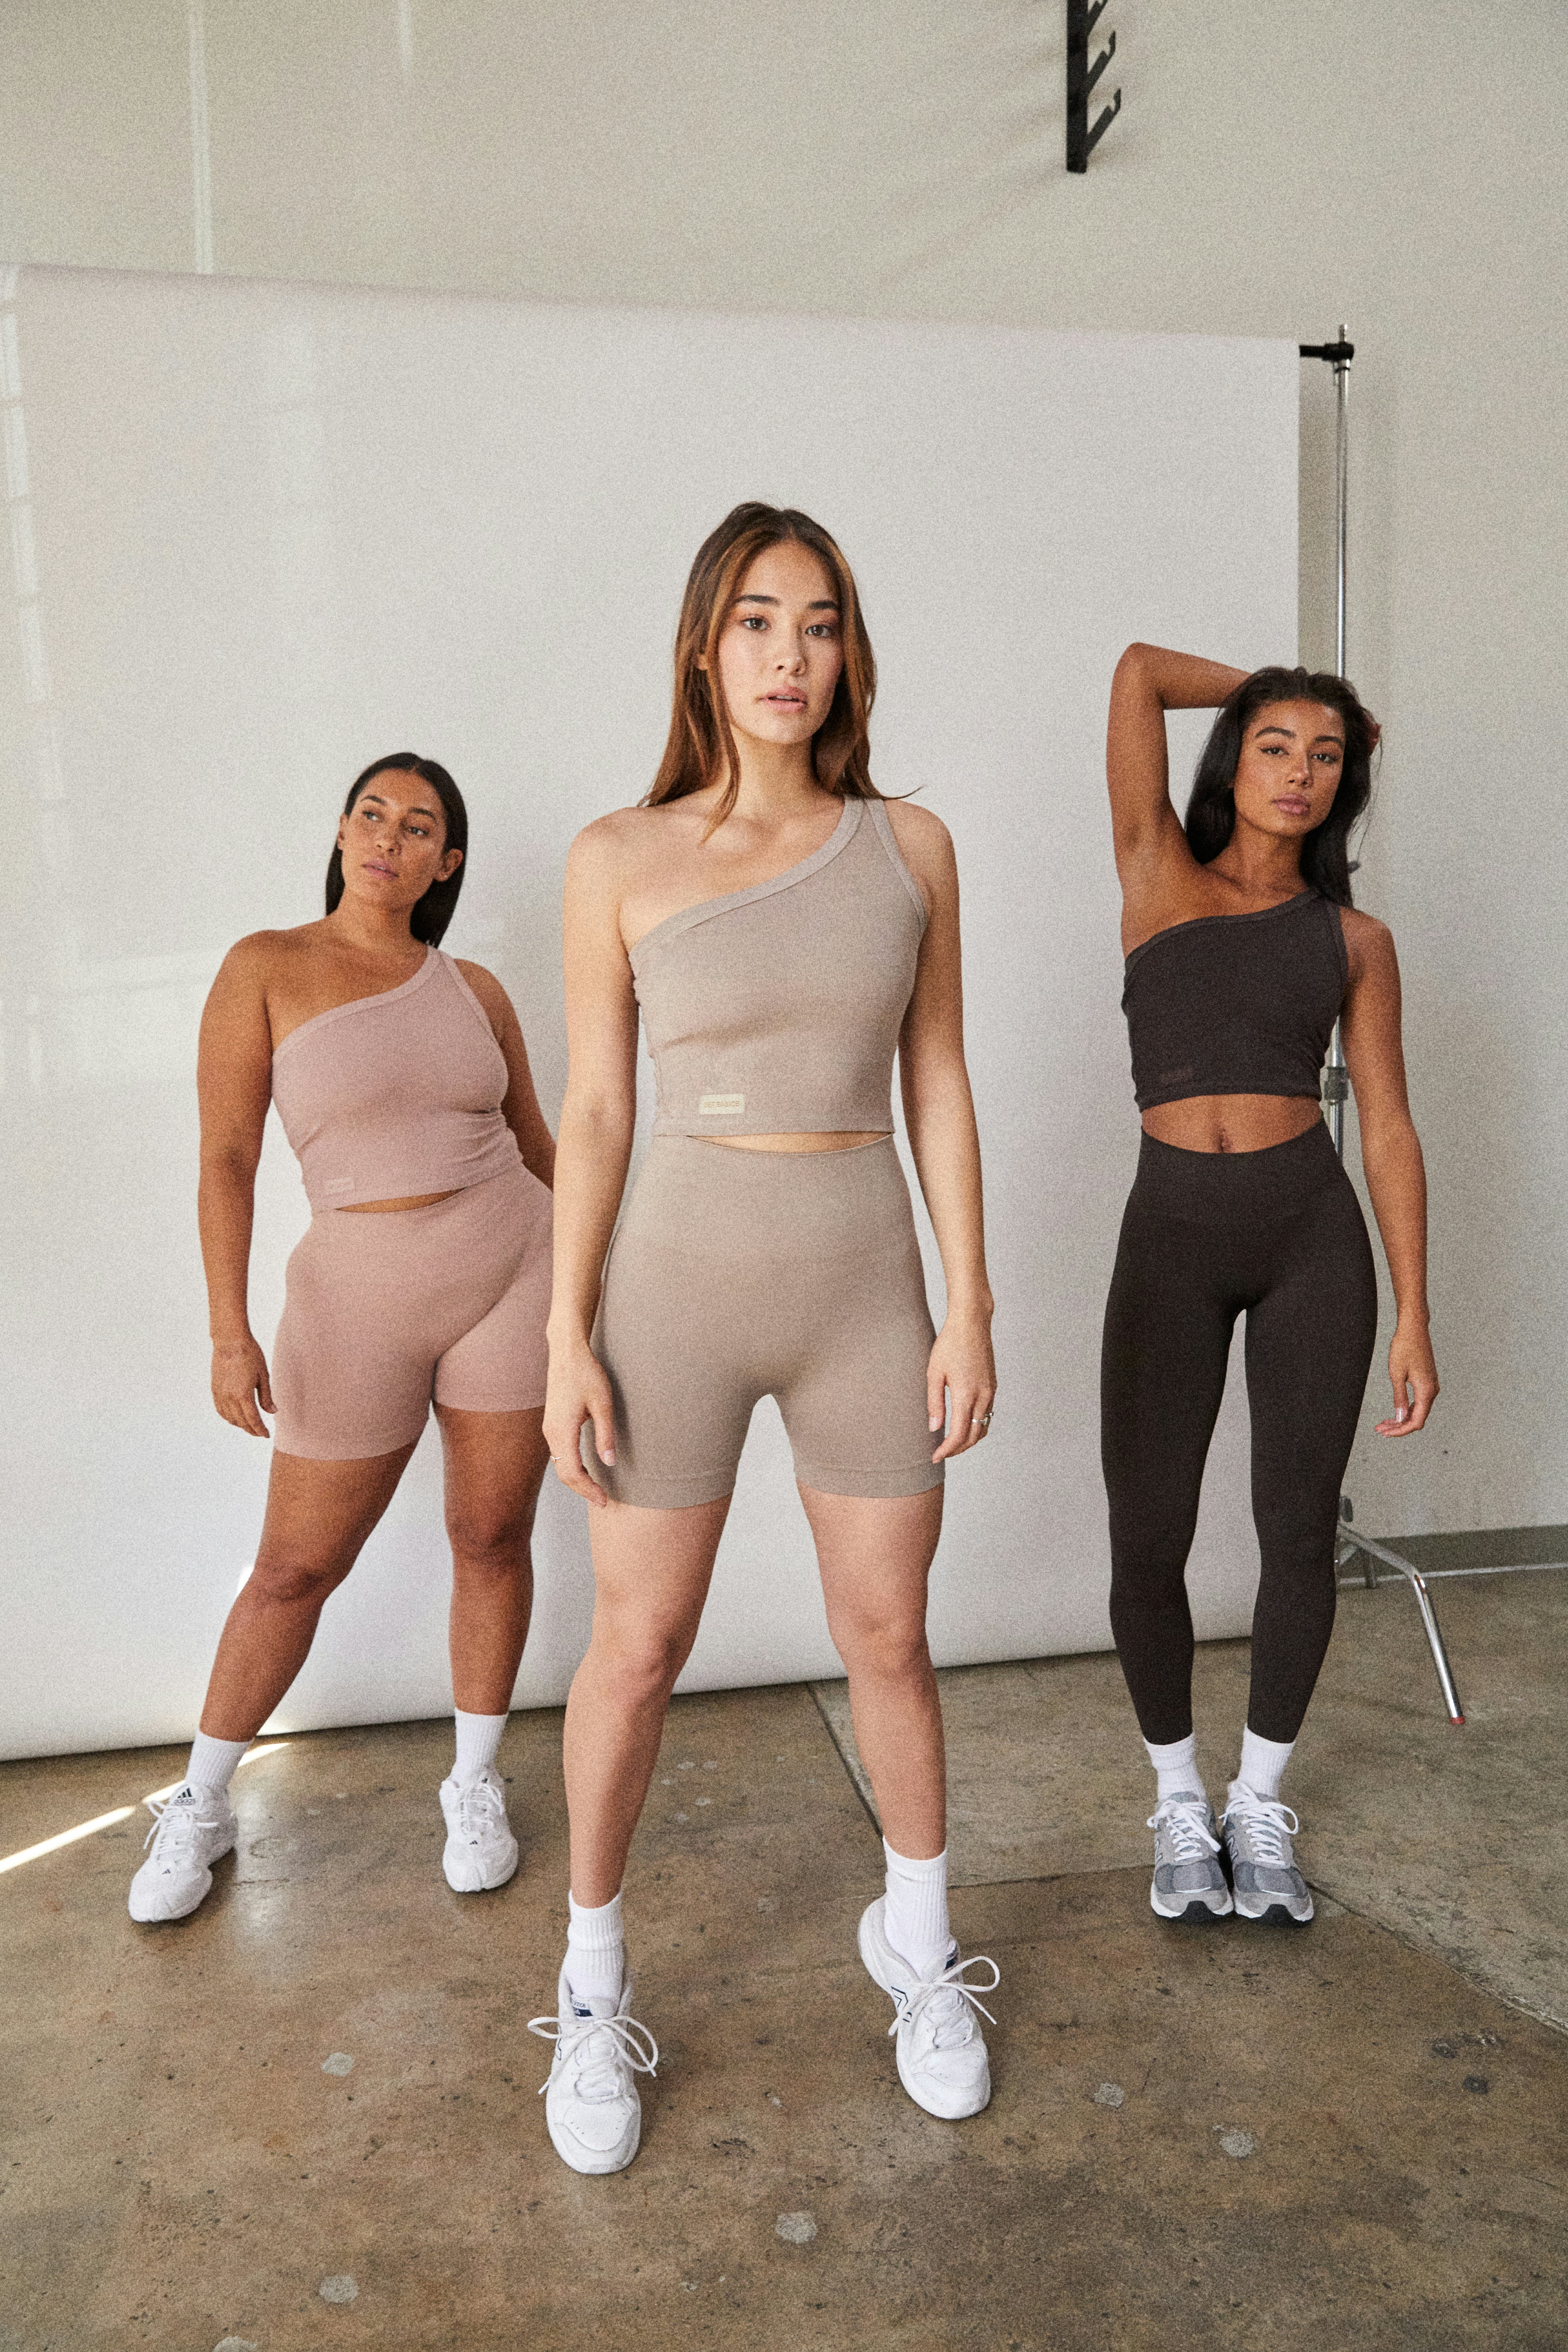 Matching Athleisure Sets Are In - Here's How To Wear Them